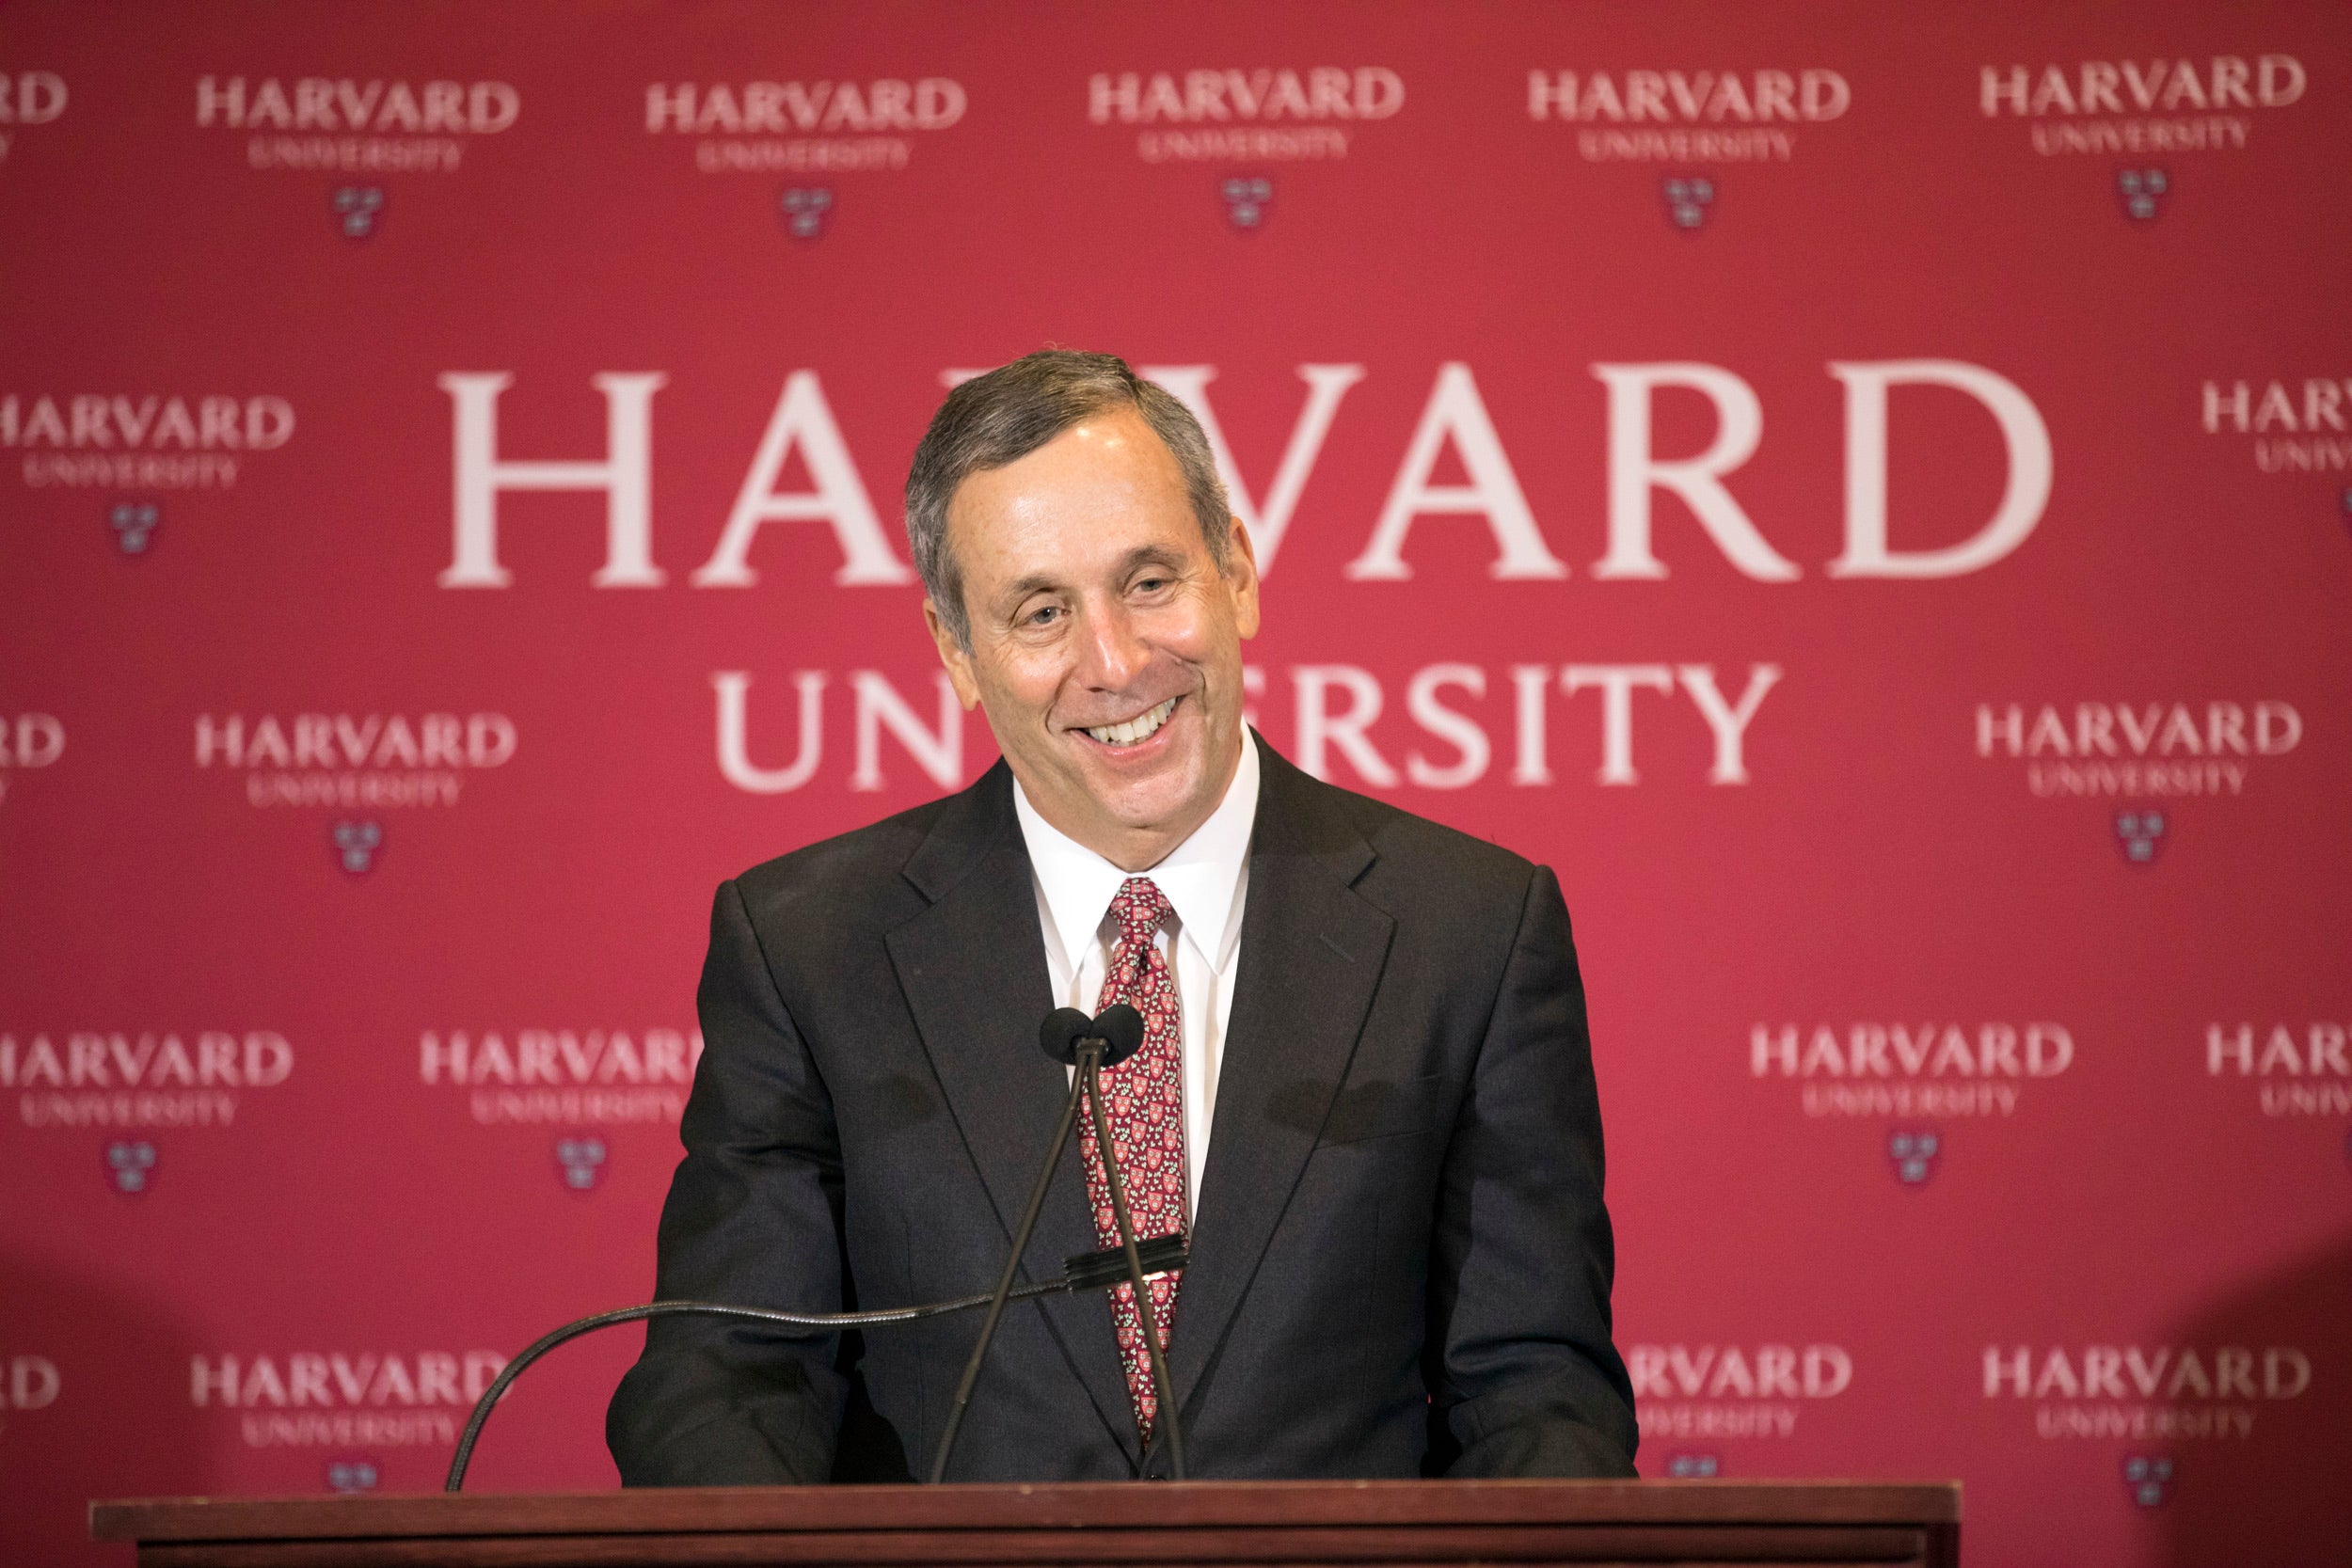 Larry Bacow is pictured at the podium in February 2018 after his selection as Harvard’s 29th president was announced at the Barker Center.